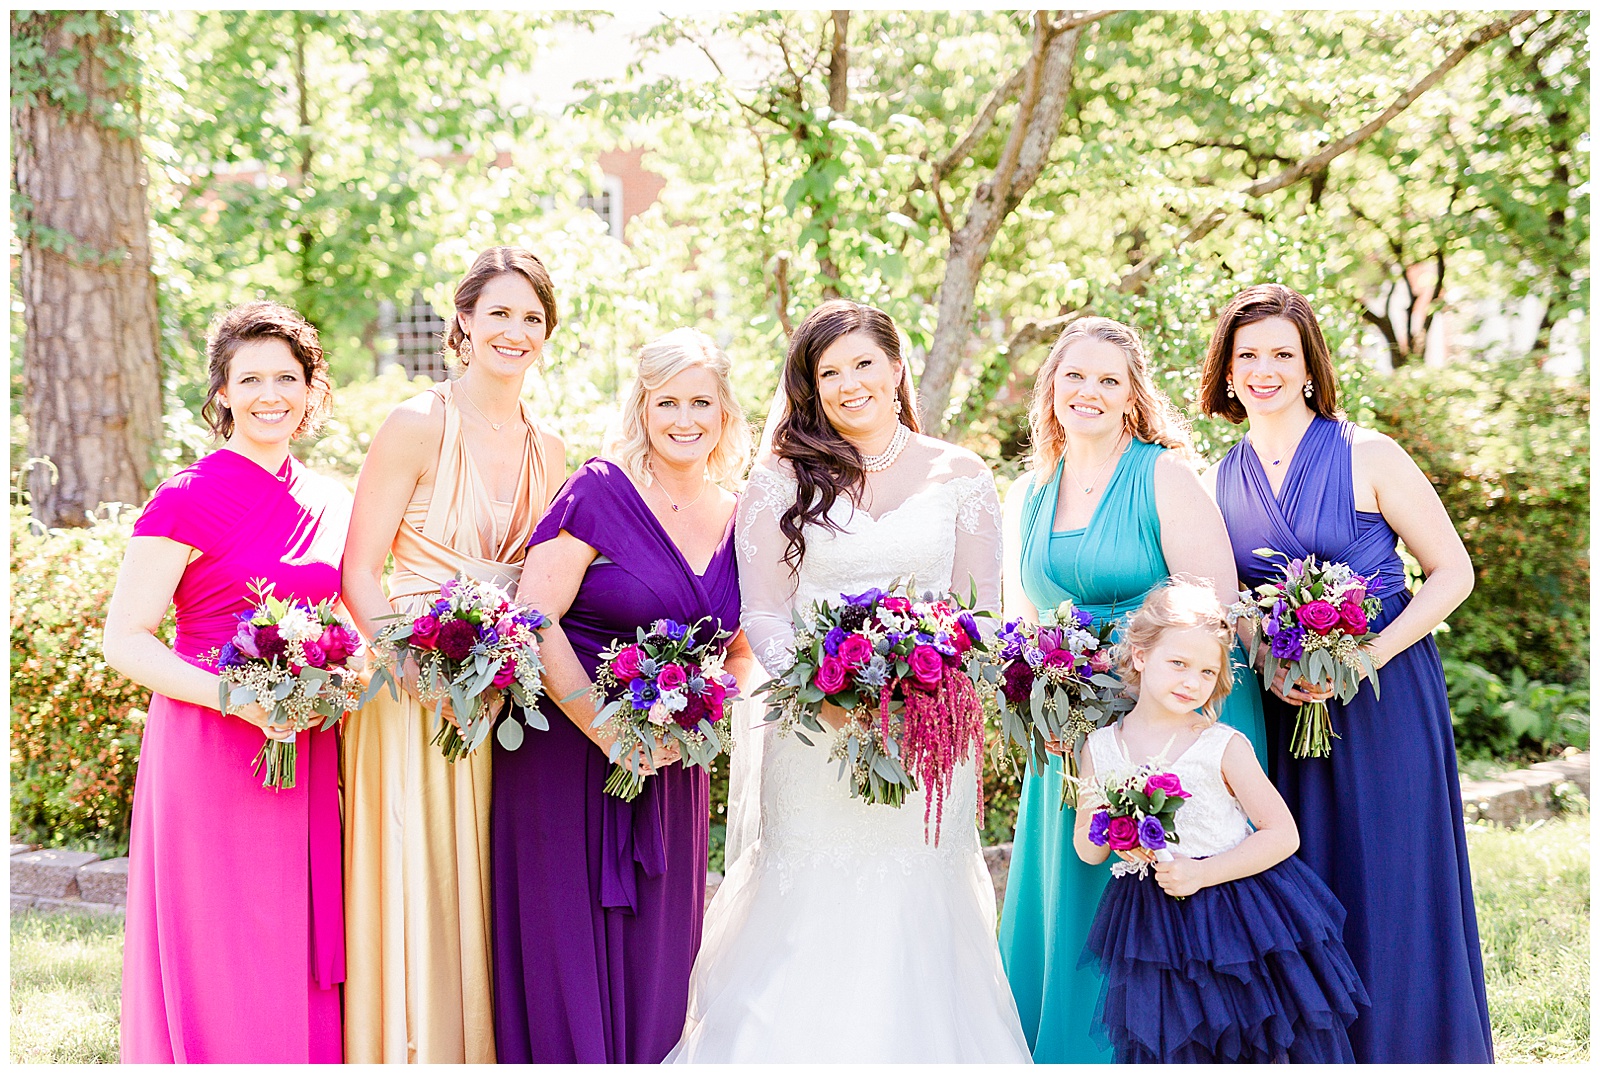 💍 bridal shot wedding veil + bride and bright colorful bridesmaids group photo wedding portrait in lace wedding dress with rhinestone belt rhinestone barrette in hair down with pearls and pink, purple, blue, and gold bridesmaid dresses 💍 Bright Colorful Summer City Wedding in Charlotte, NC with Taryn and Ryan | Kevyn Dixon Photography